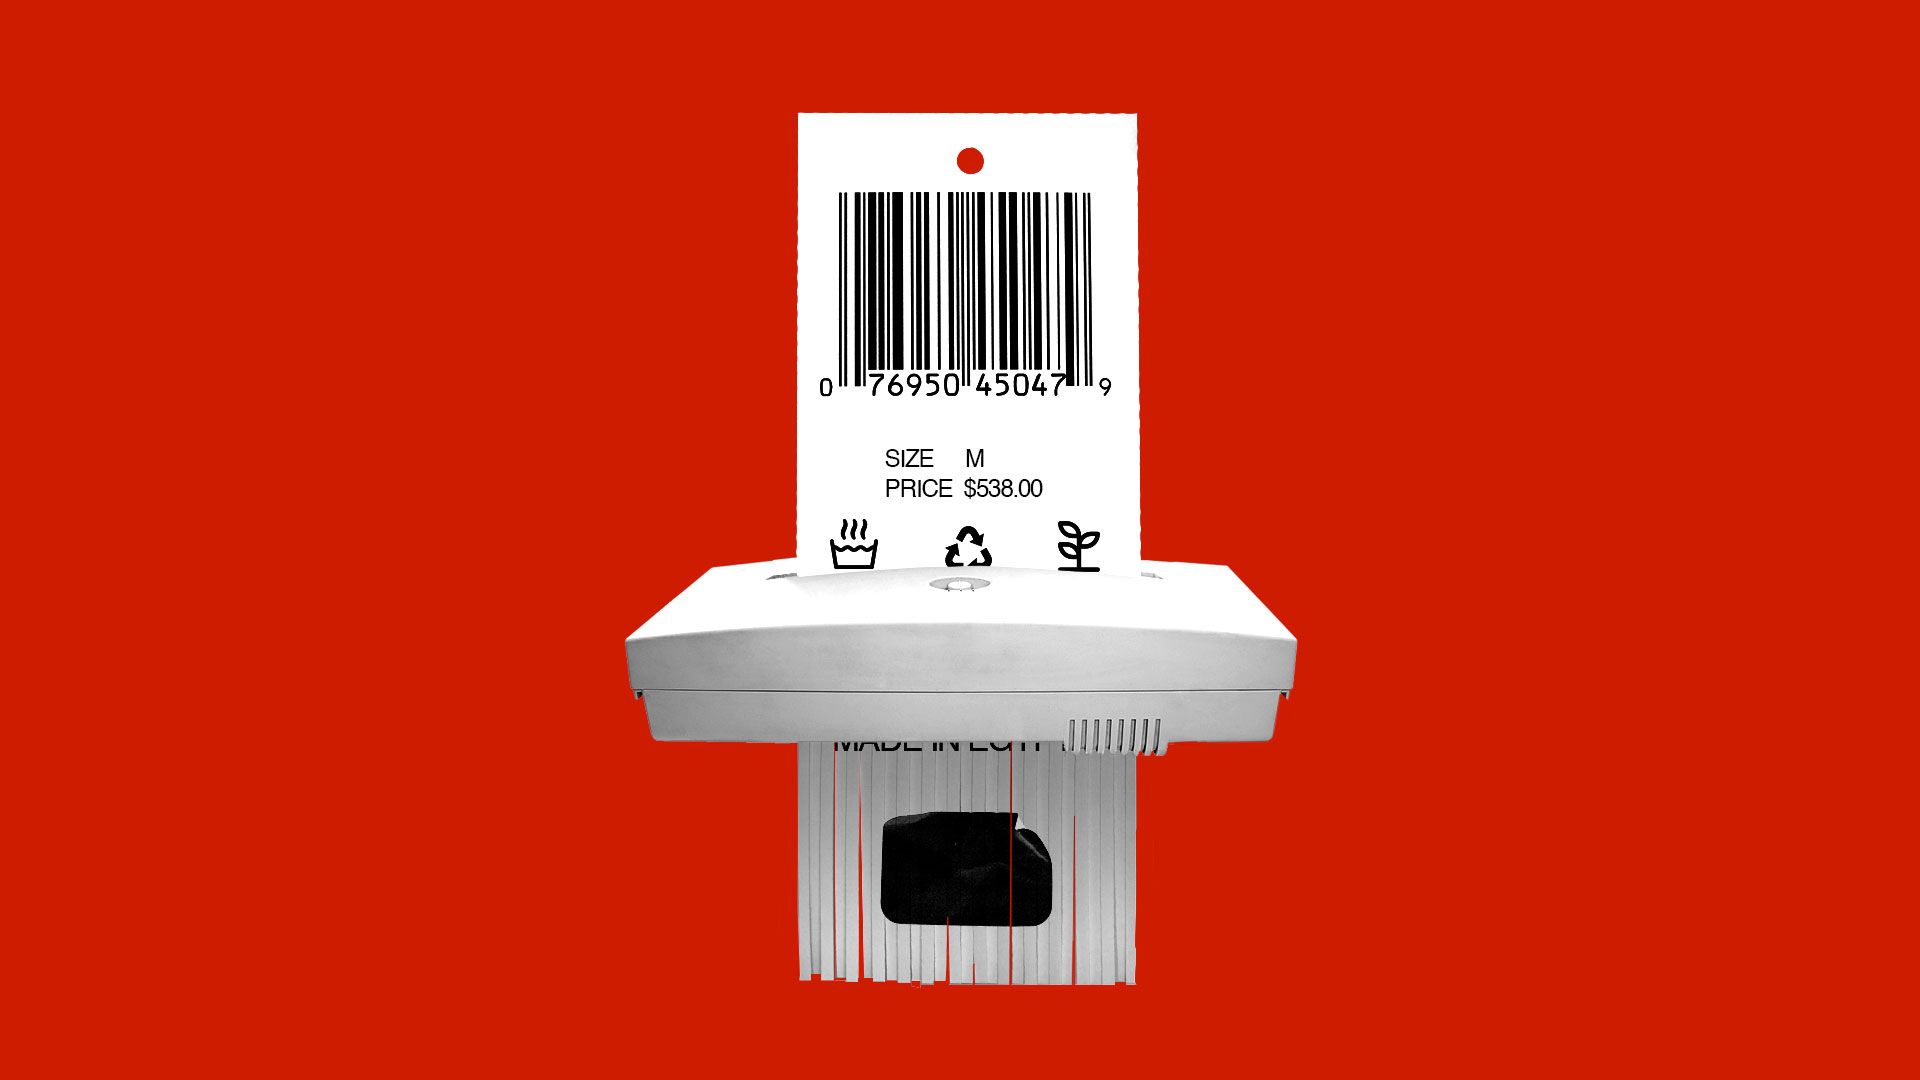 Illustration of a price tag being shredded